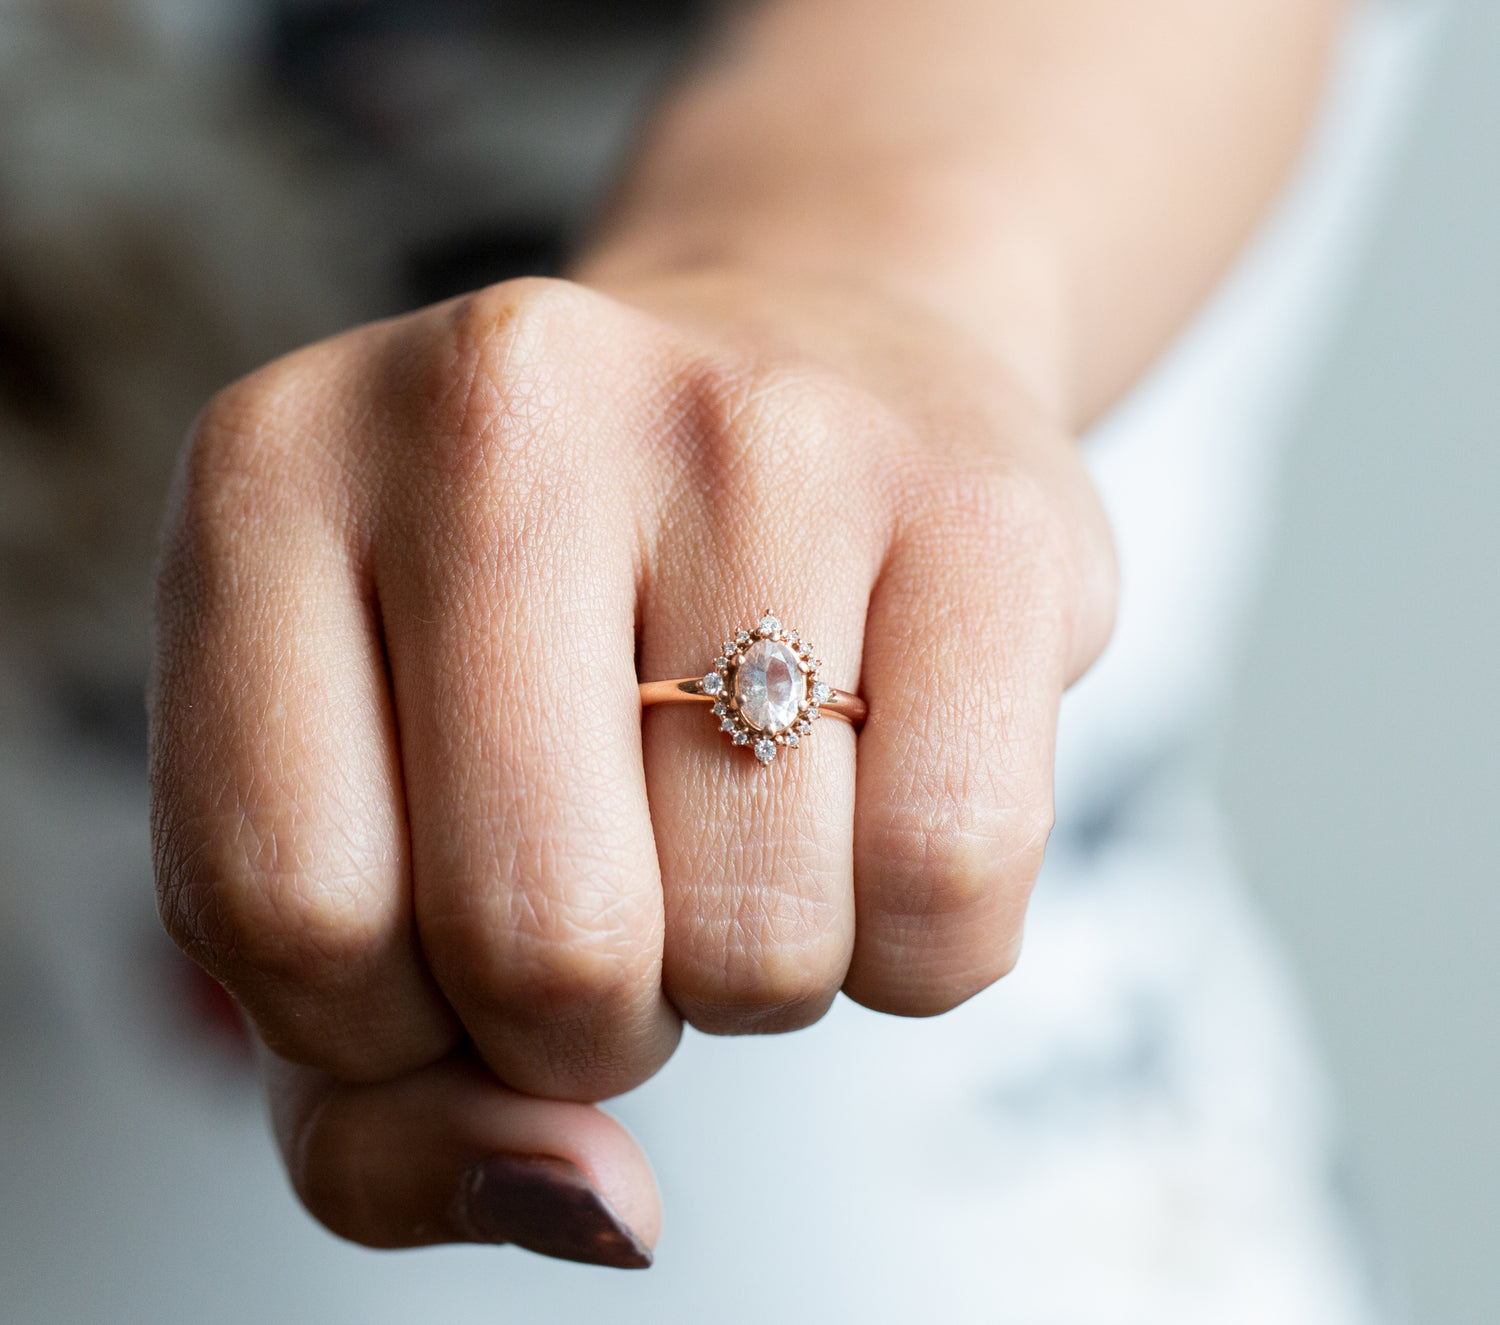 A woman holding out her left hand. On her finger she is wearing a rose gold diamond ring. This ring is part of the Engagement collection designed and handcrafted by W.R. Metalarts who are based in Vermont.